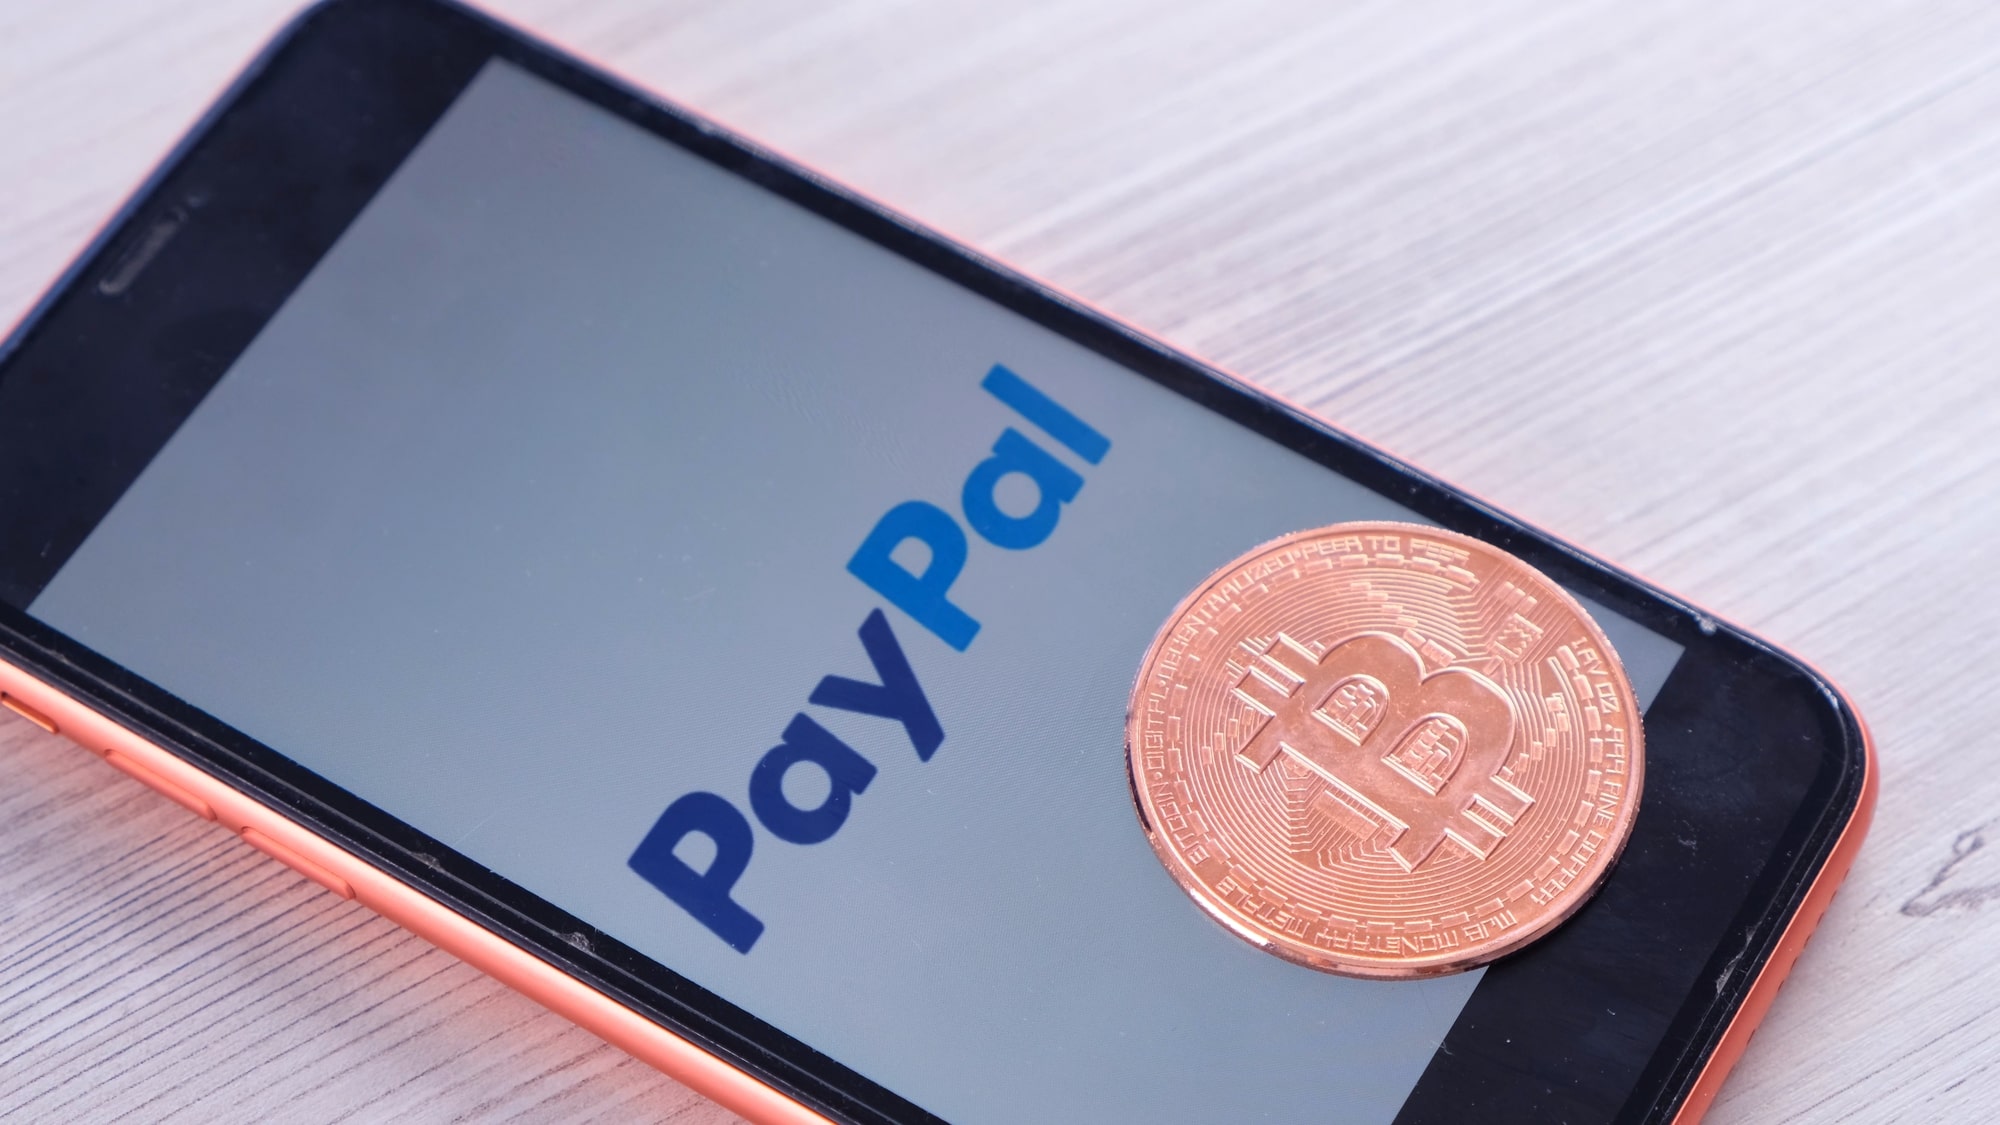 Bitcoin surpasses PayPal in value transferred, reaching 27% of Mastercard